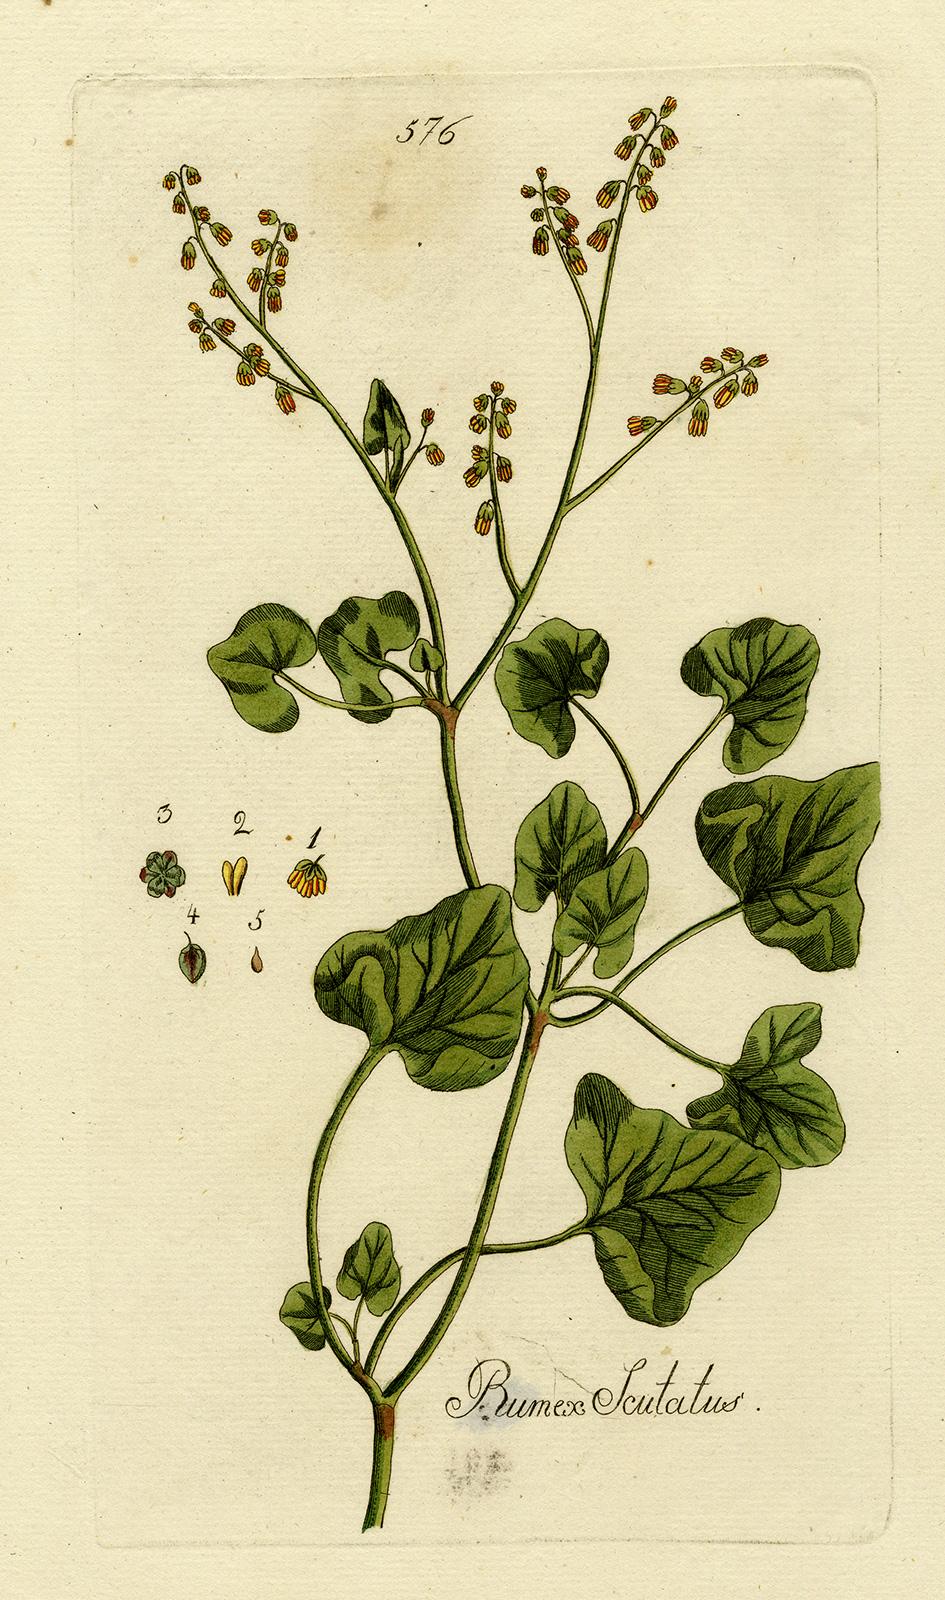 Andreas Friedrich Happe Still-Life Print - French Sorrel from Medicinal Plants by Happe - Handcoloured engraving - 18th c.